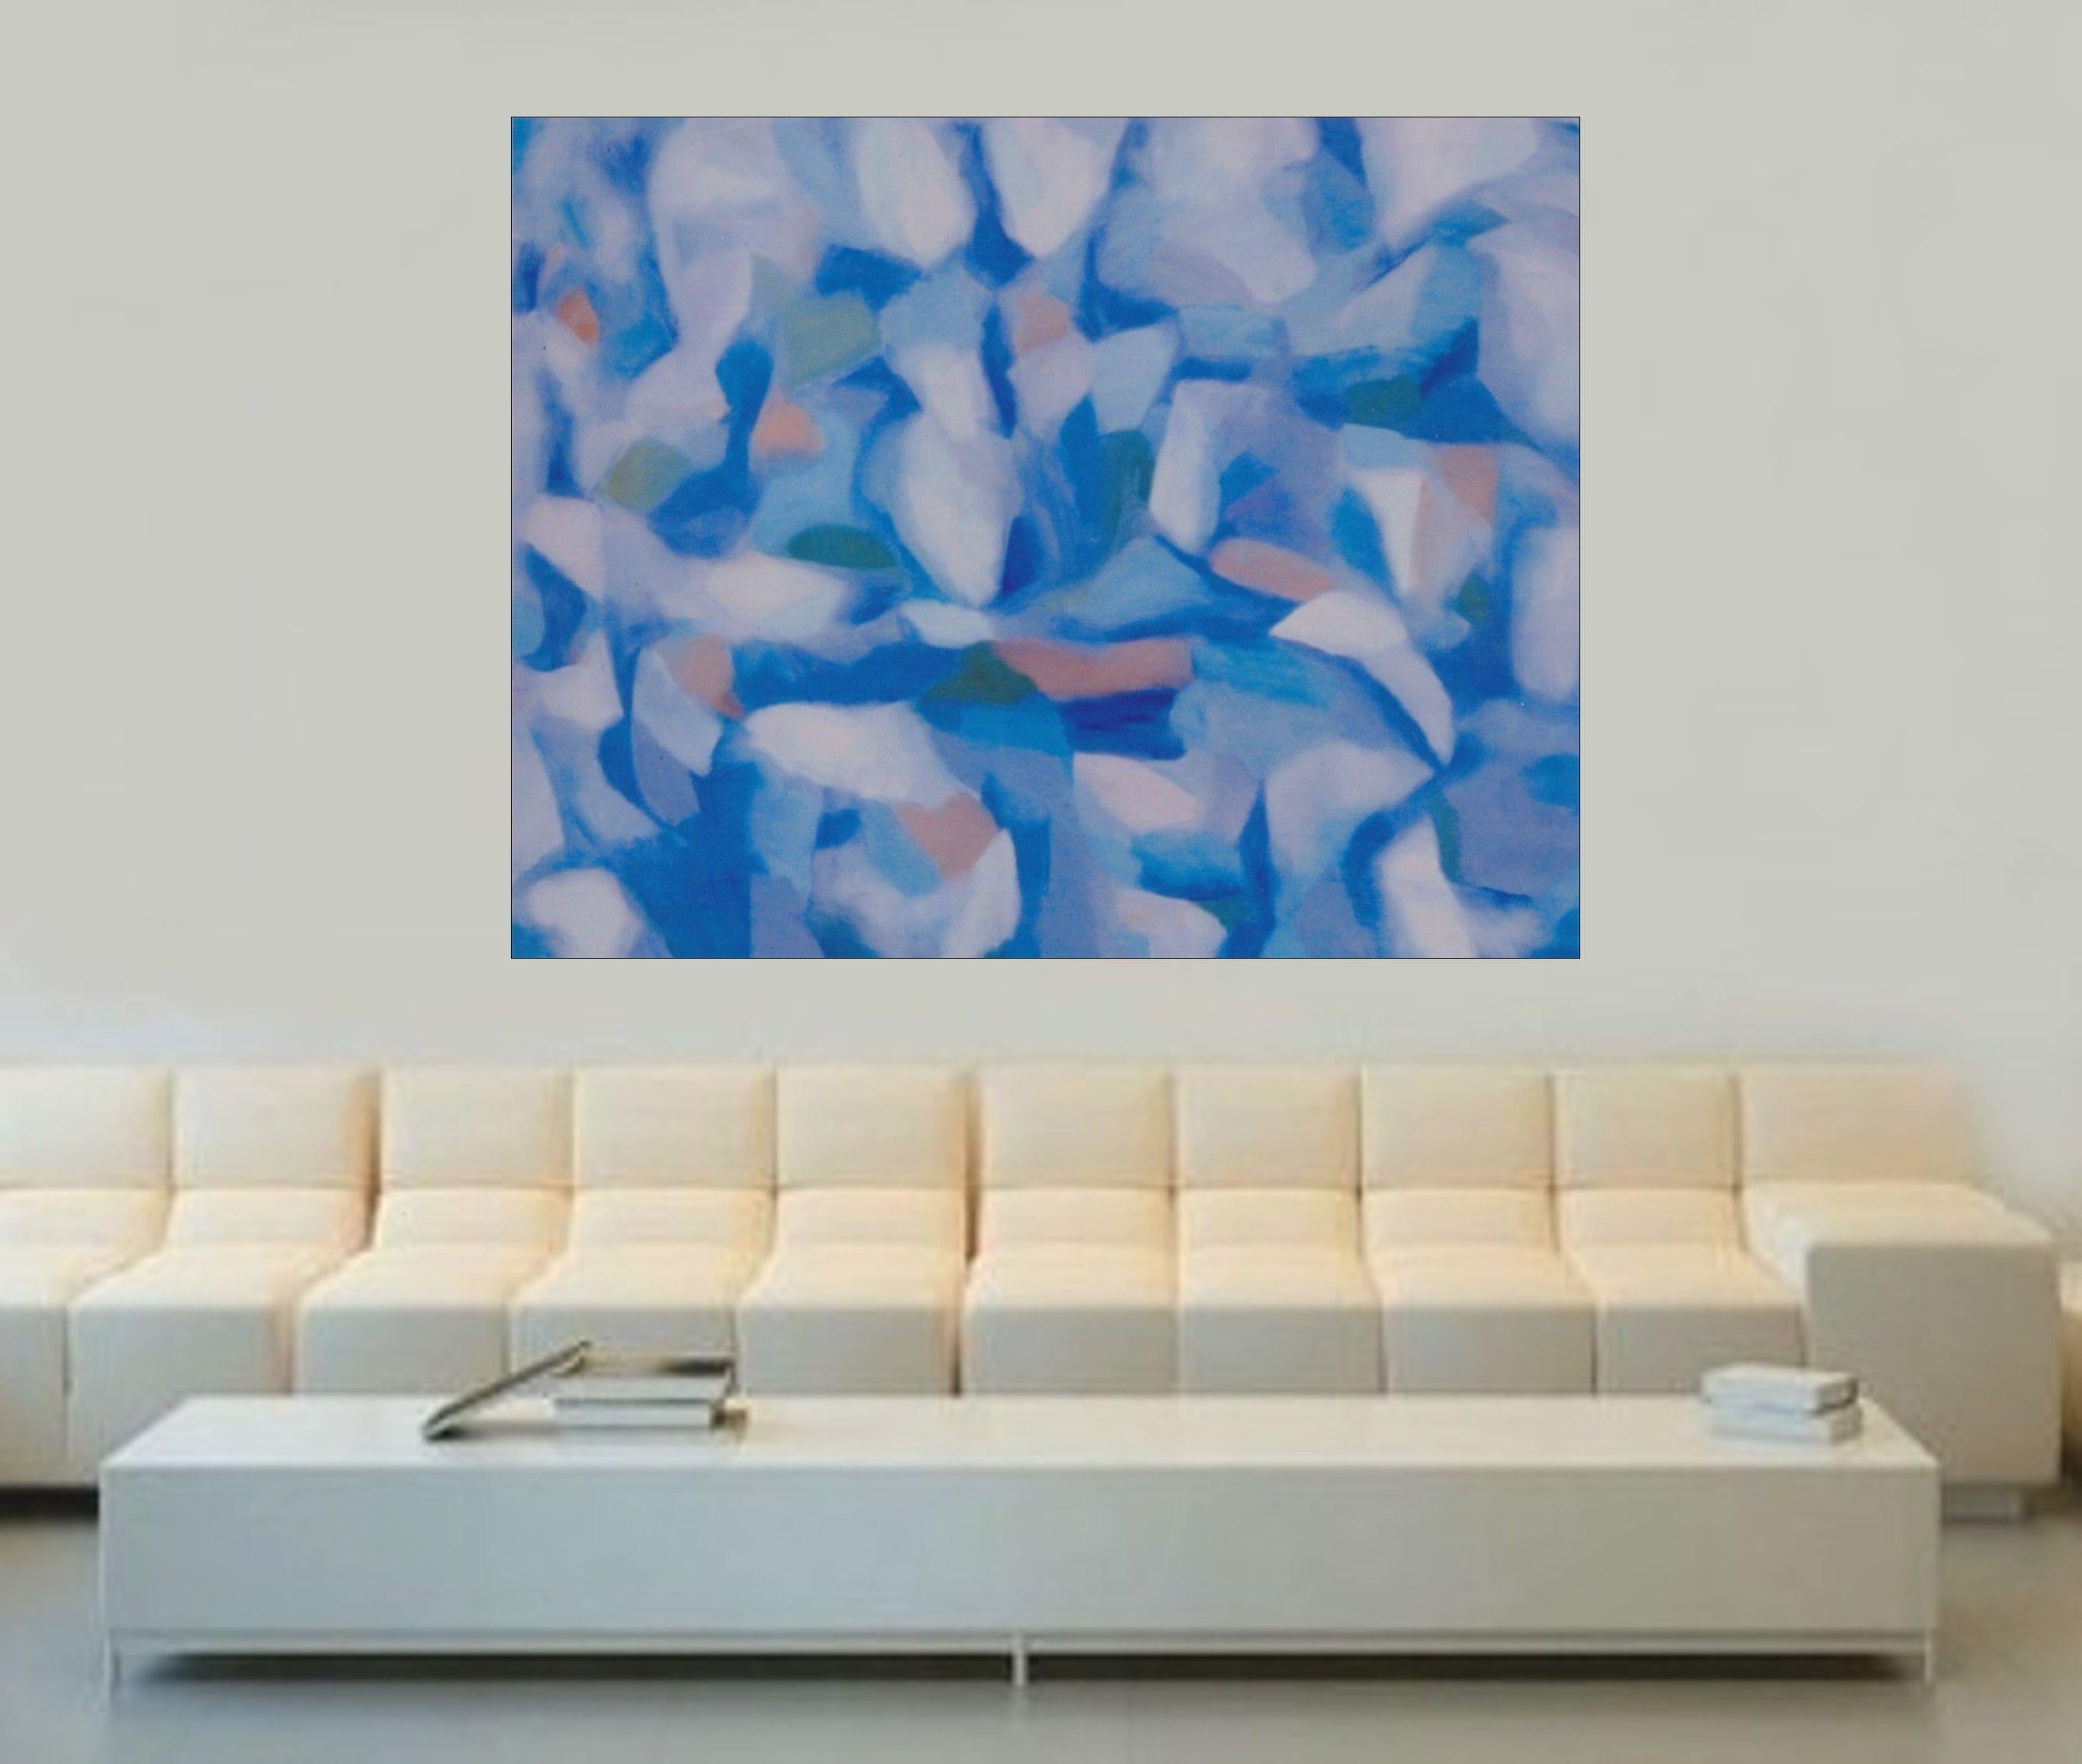 A mosaic of cool blue and cream designates this work as highly decorative,  one with a strong geometry which is permanent, yet soft and undulating.  :: Painting :: Abstract :: This piece comes with an official certificate of authenticity signed by